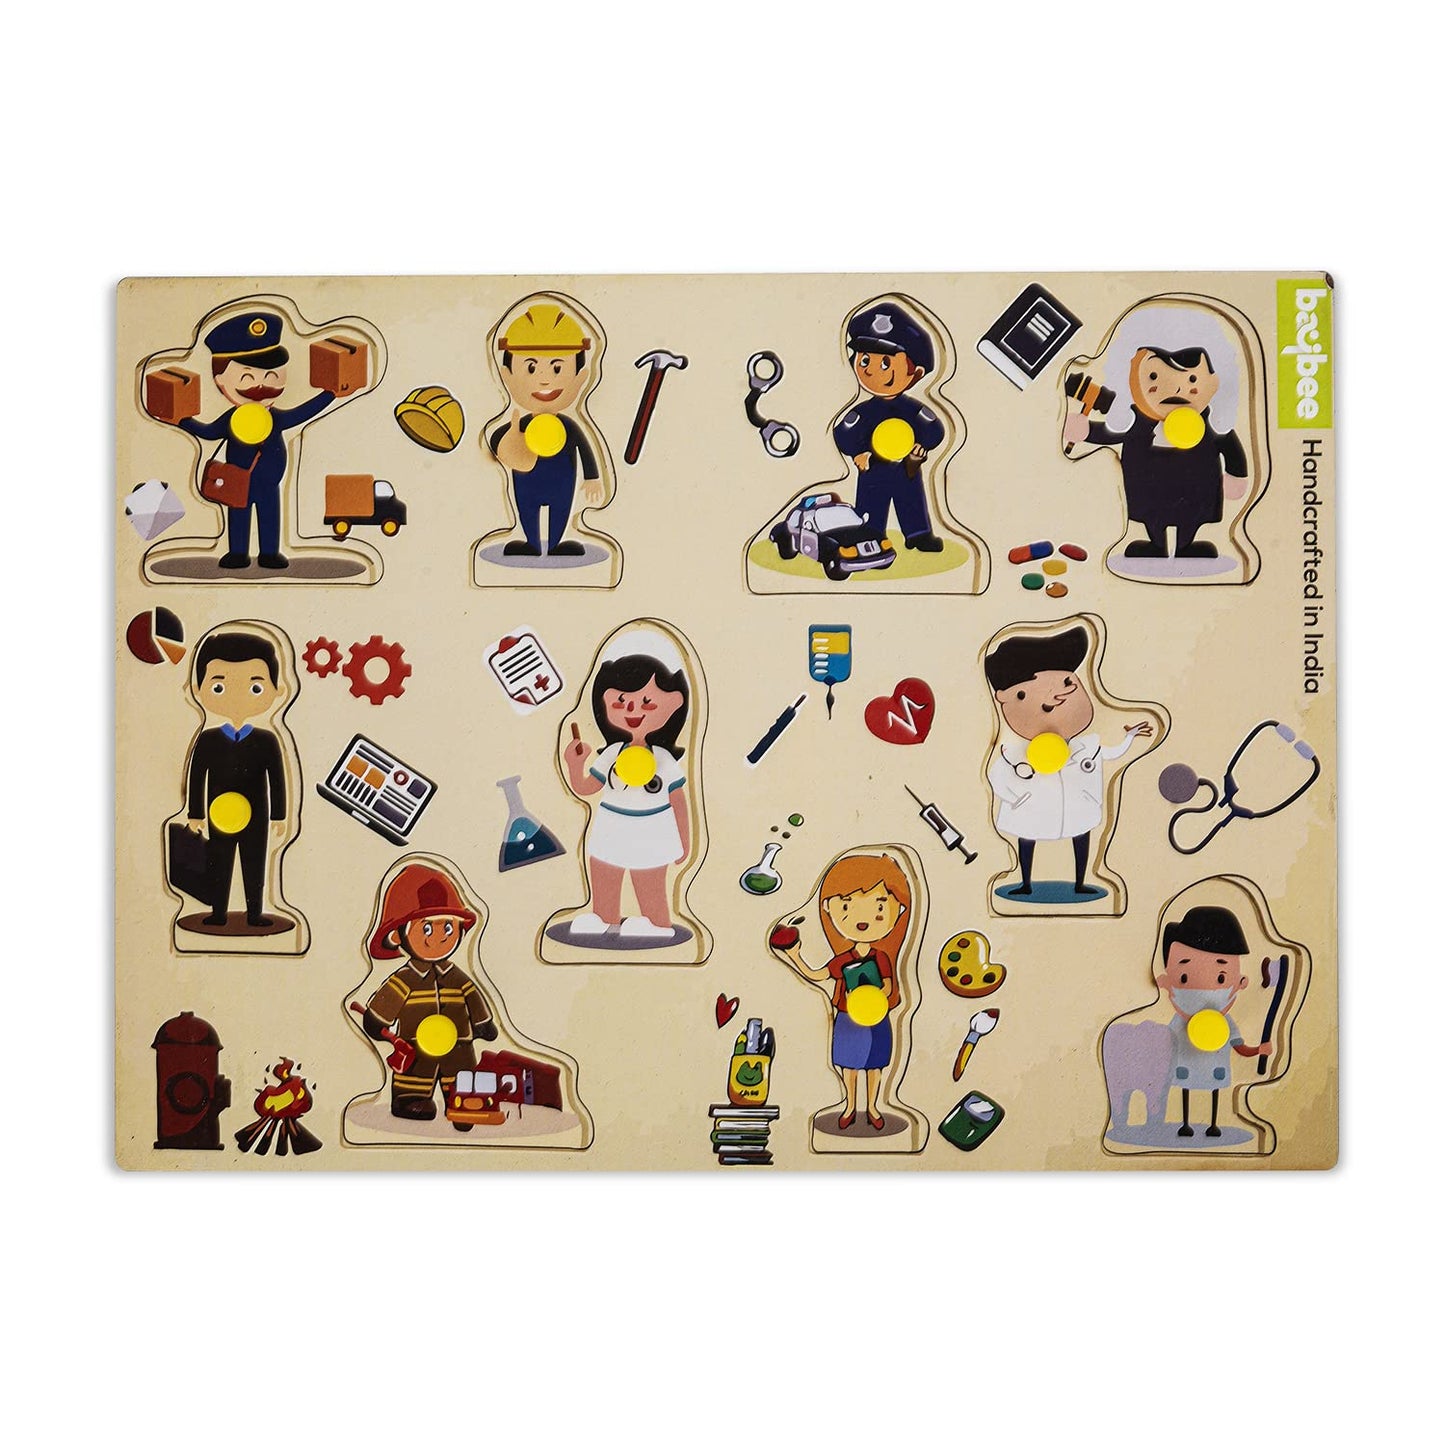 BAYBEE Community Helpers Wooden Puzzle Games for Kids with Easy Pulling Knob 10 Pcs